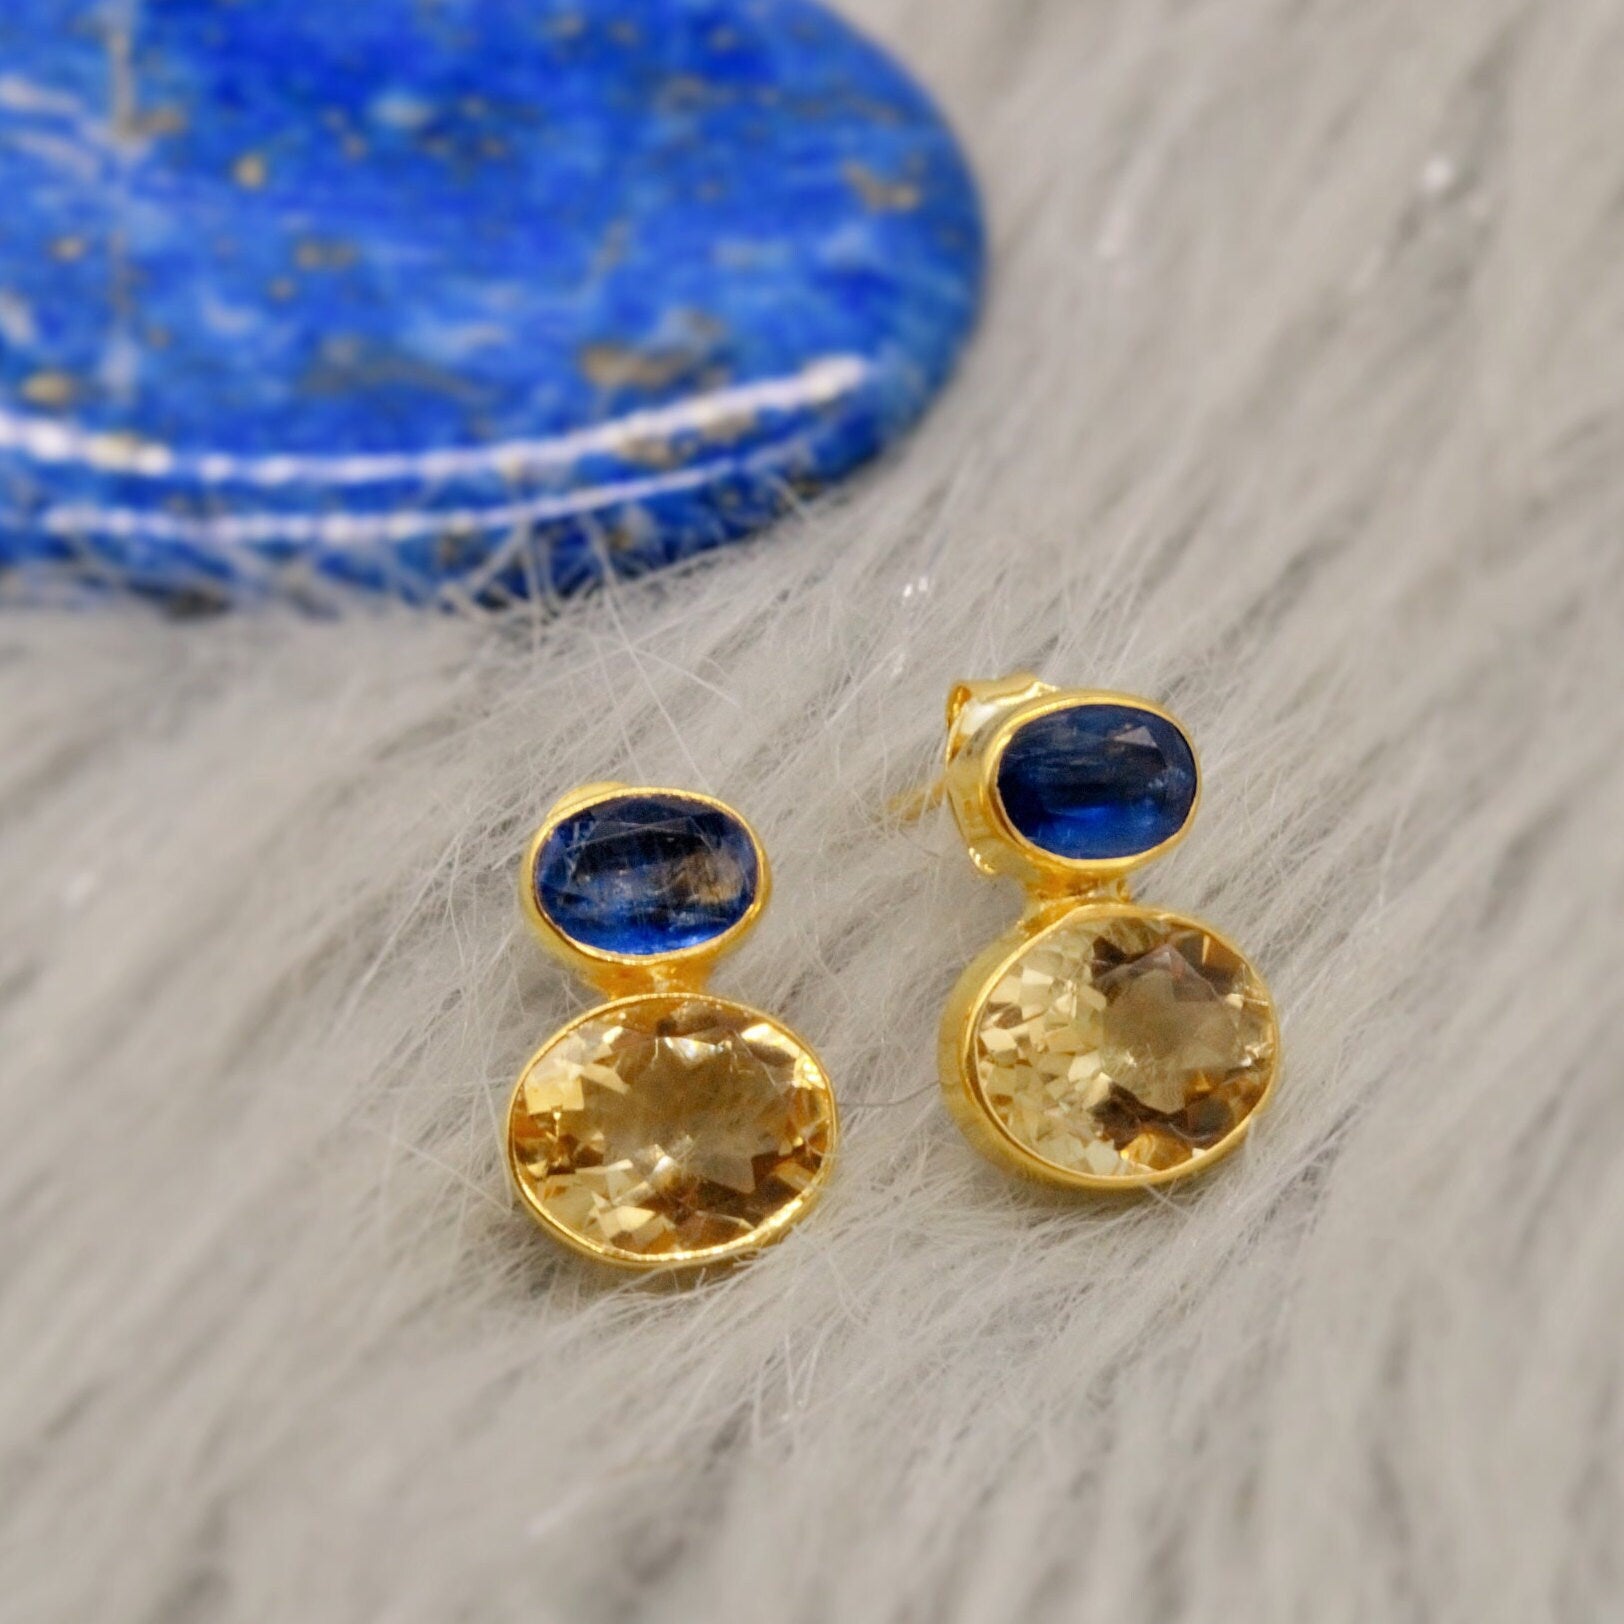 Kyanite, Citrine Gold Earrings, Gold Plated Silver Stud Earrings, Citrine Jewelry, Unique Statement Earrings, November Stone, Gift For Her